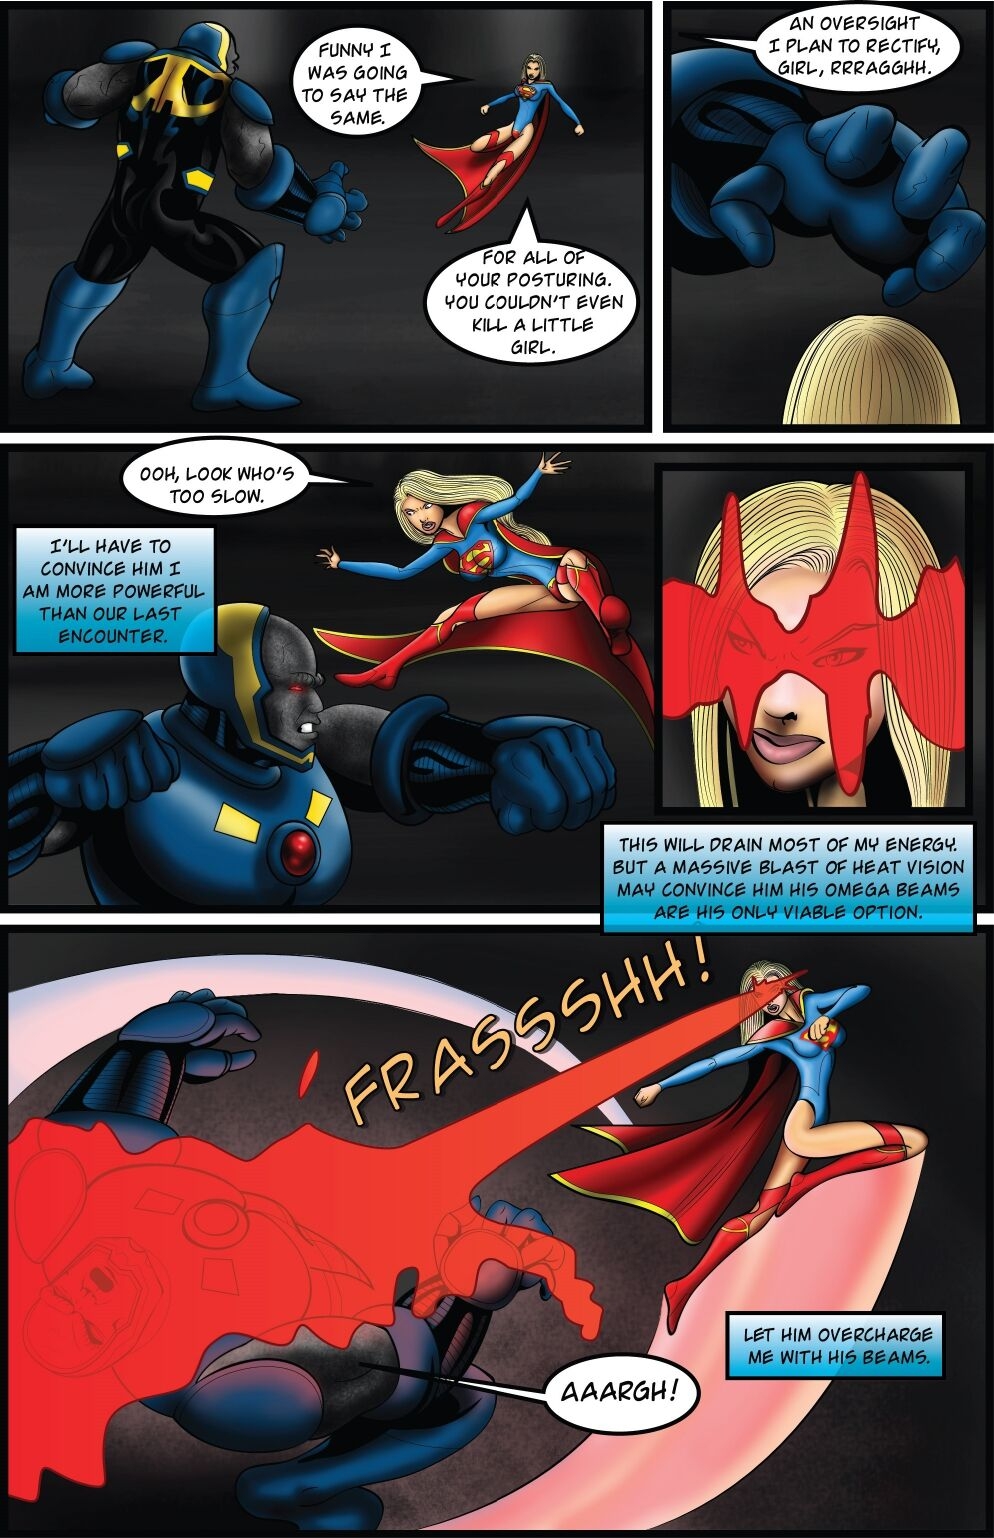 Supergirl: Issue #10 - Countdown to Extinction Part 3 24